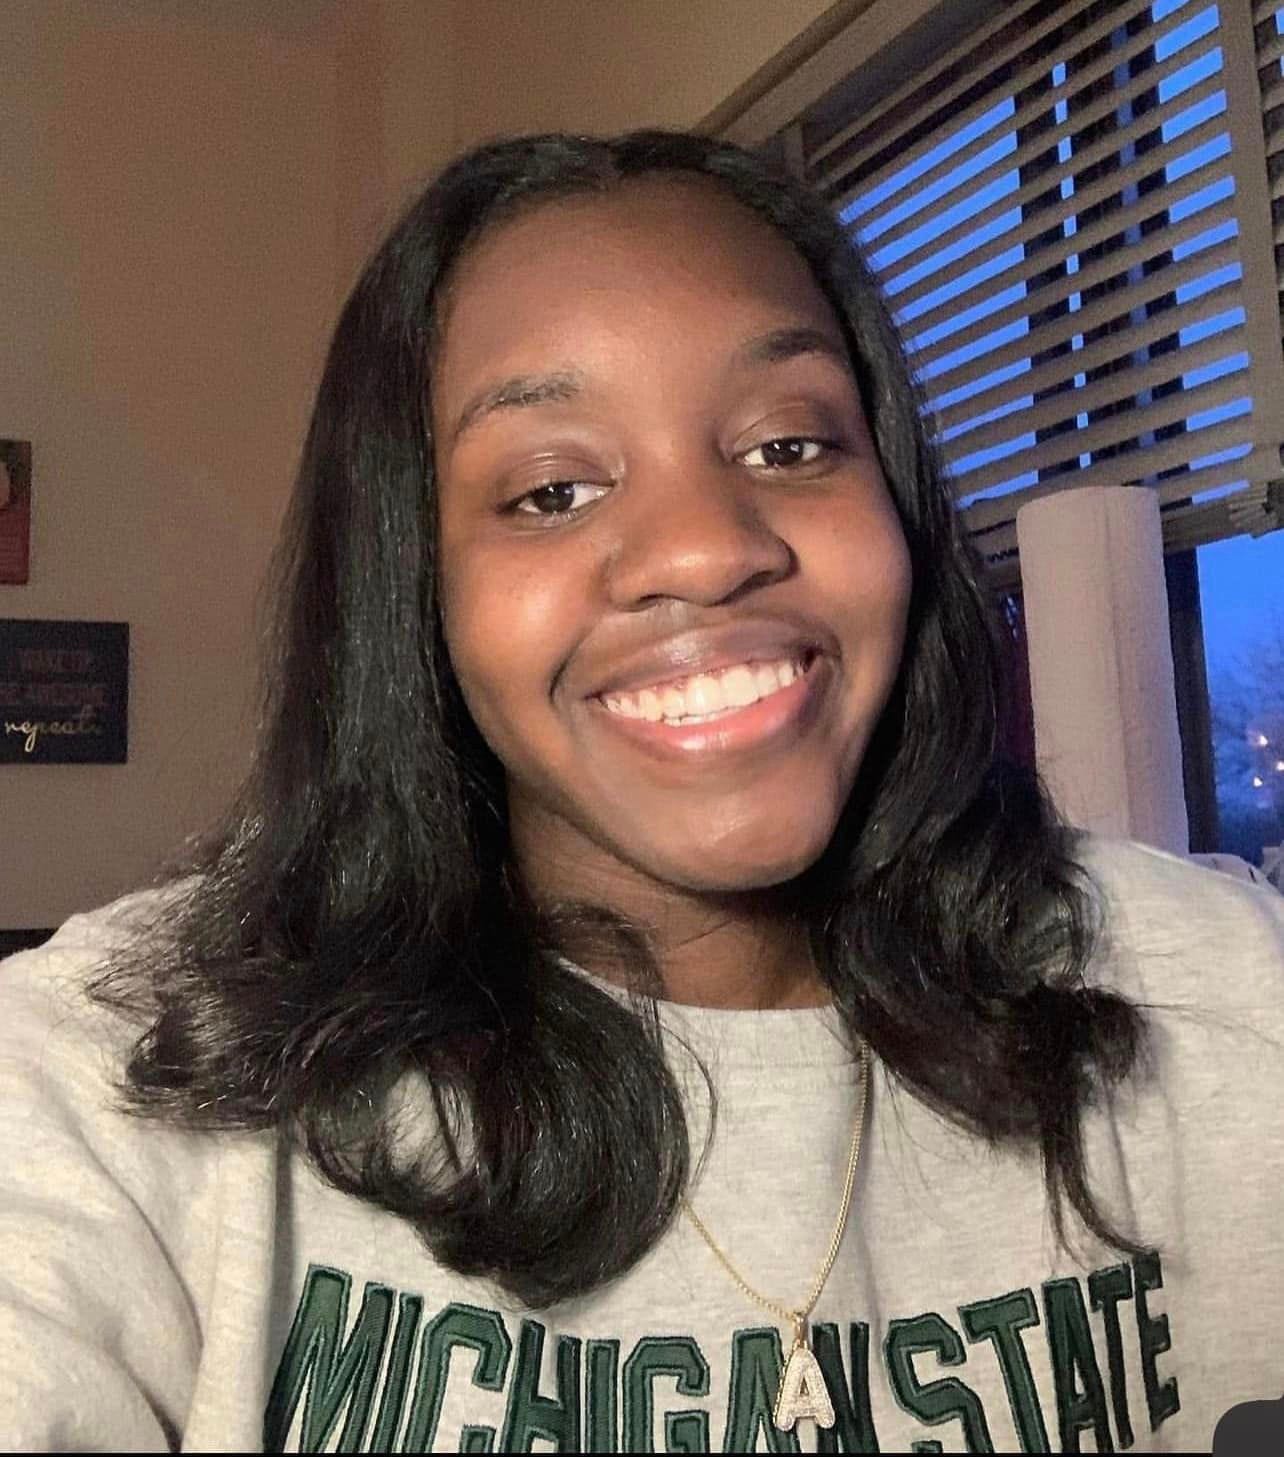 Arielle Anderson, who was a shining light as a Michigan State University student from of Harper Woods, was tragically killed by a campus shooter one year ago.